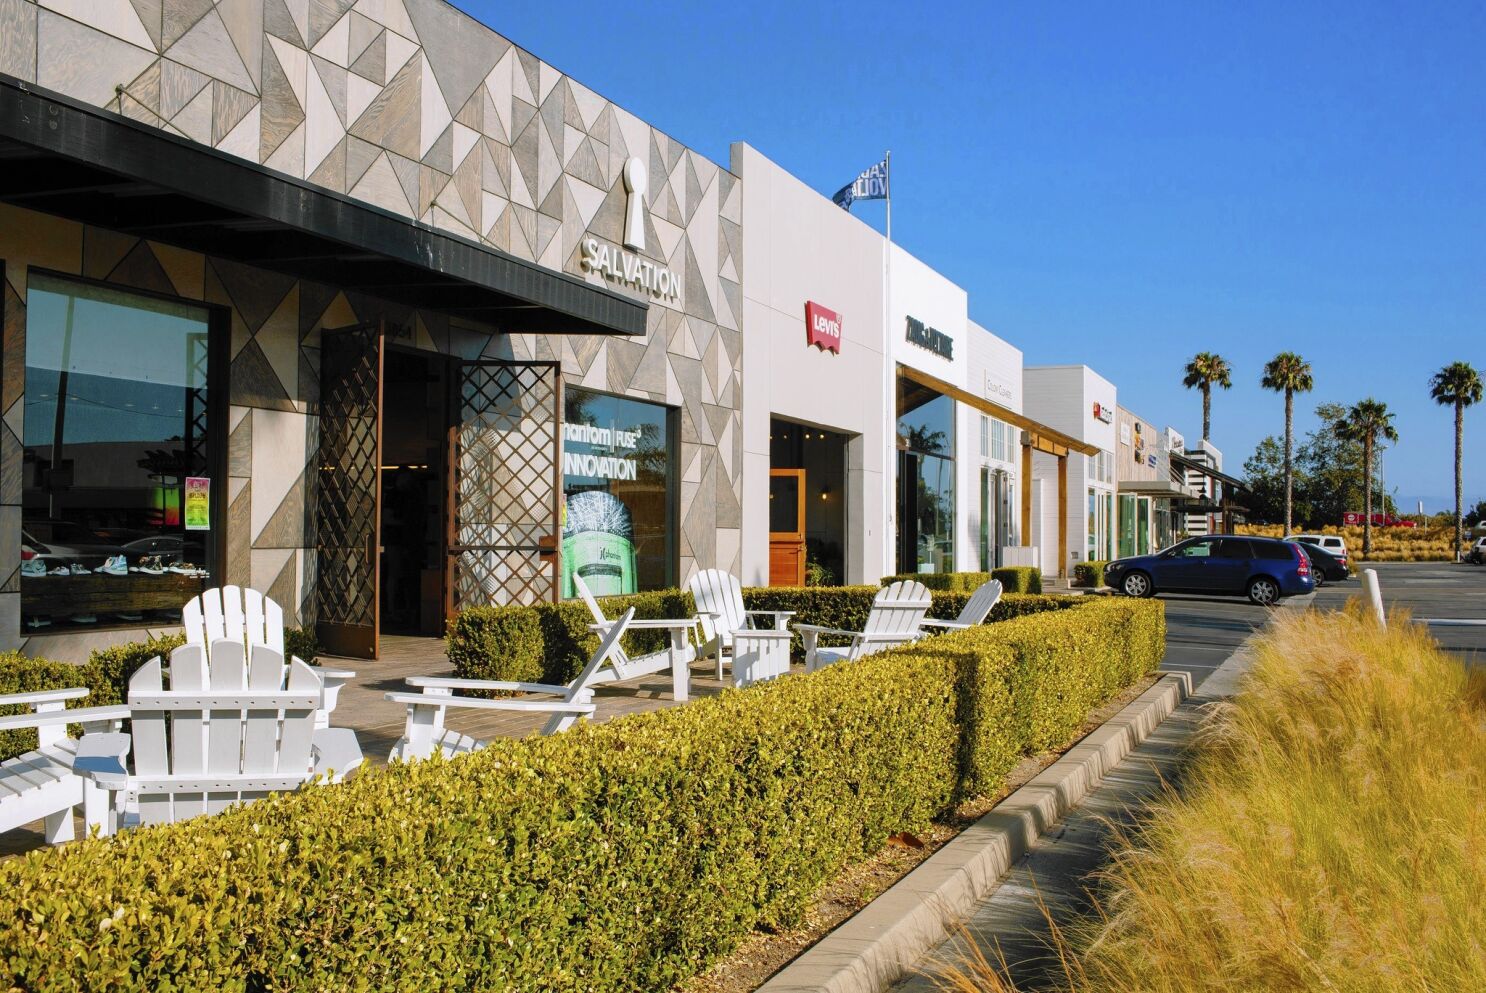 Malibu Village shopping center is sold - Los Angeles Times